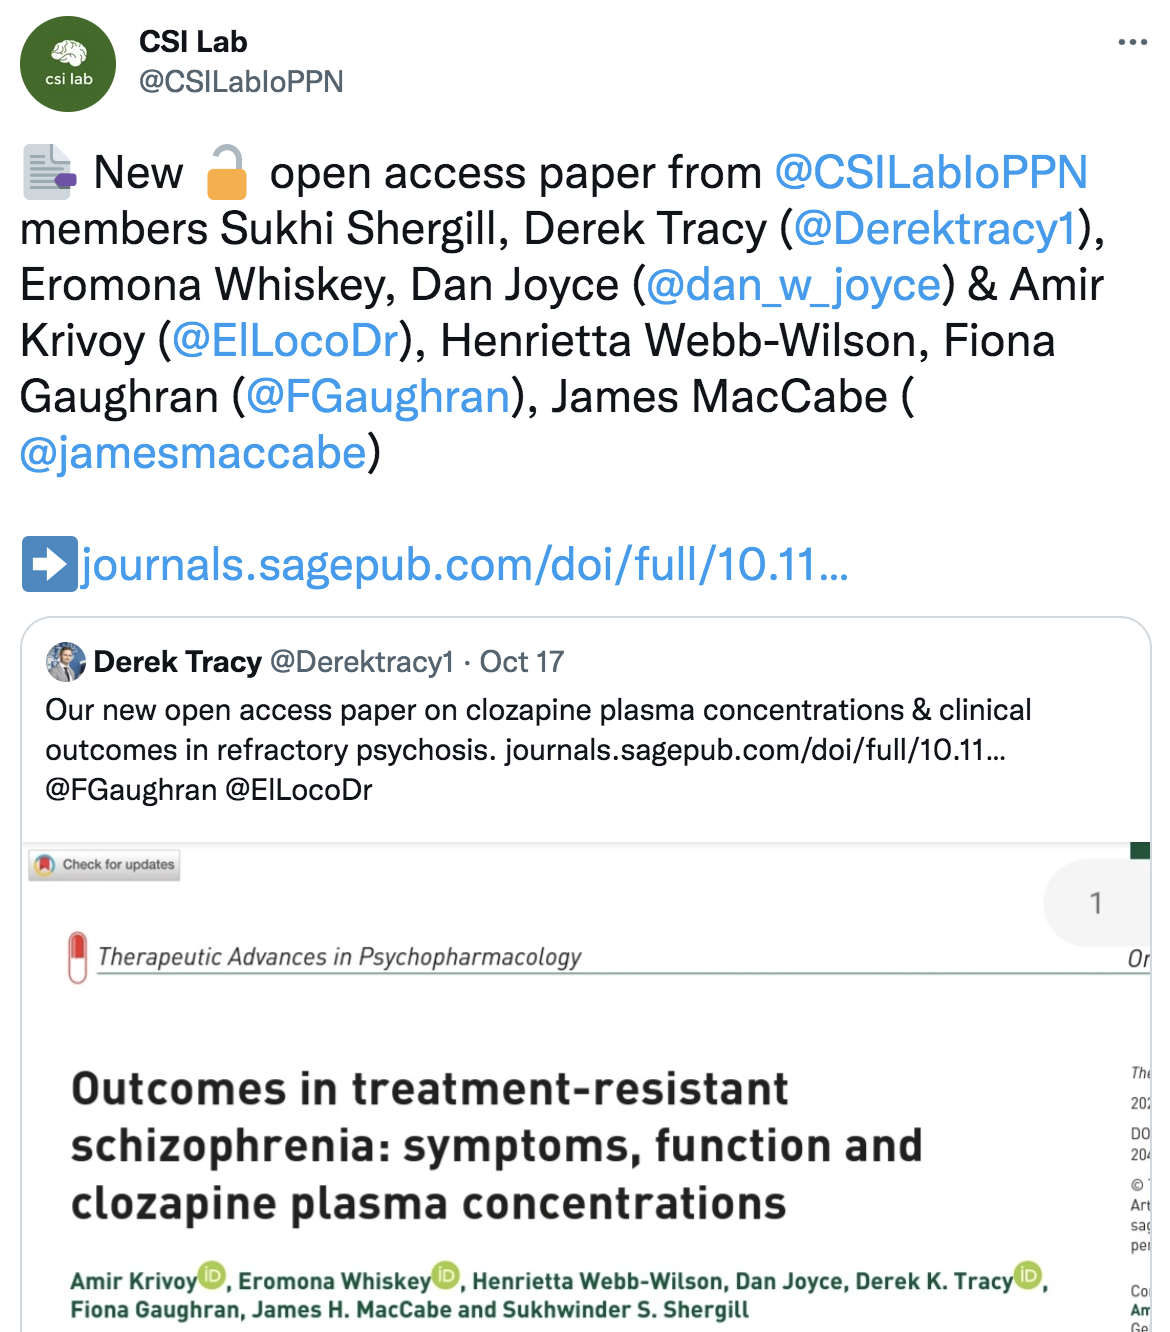 Outcomes in treatment-resistant schizophrenia.png